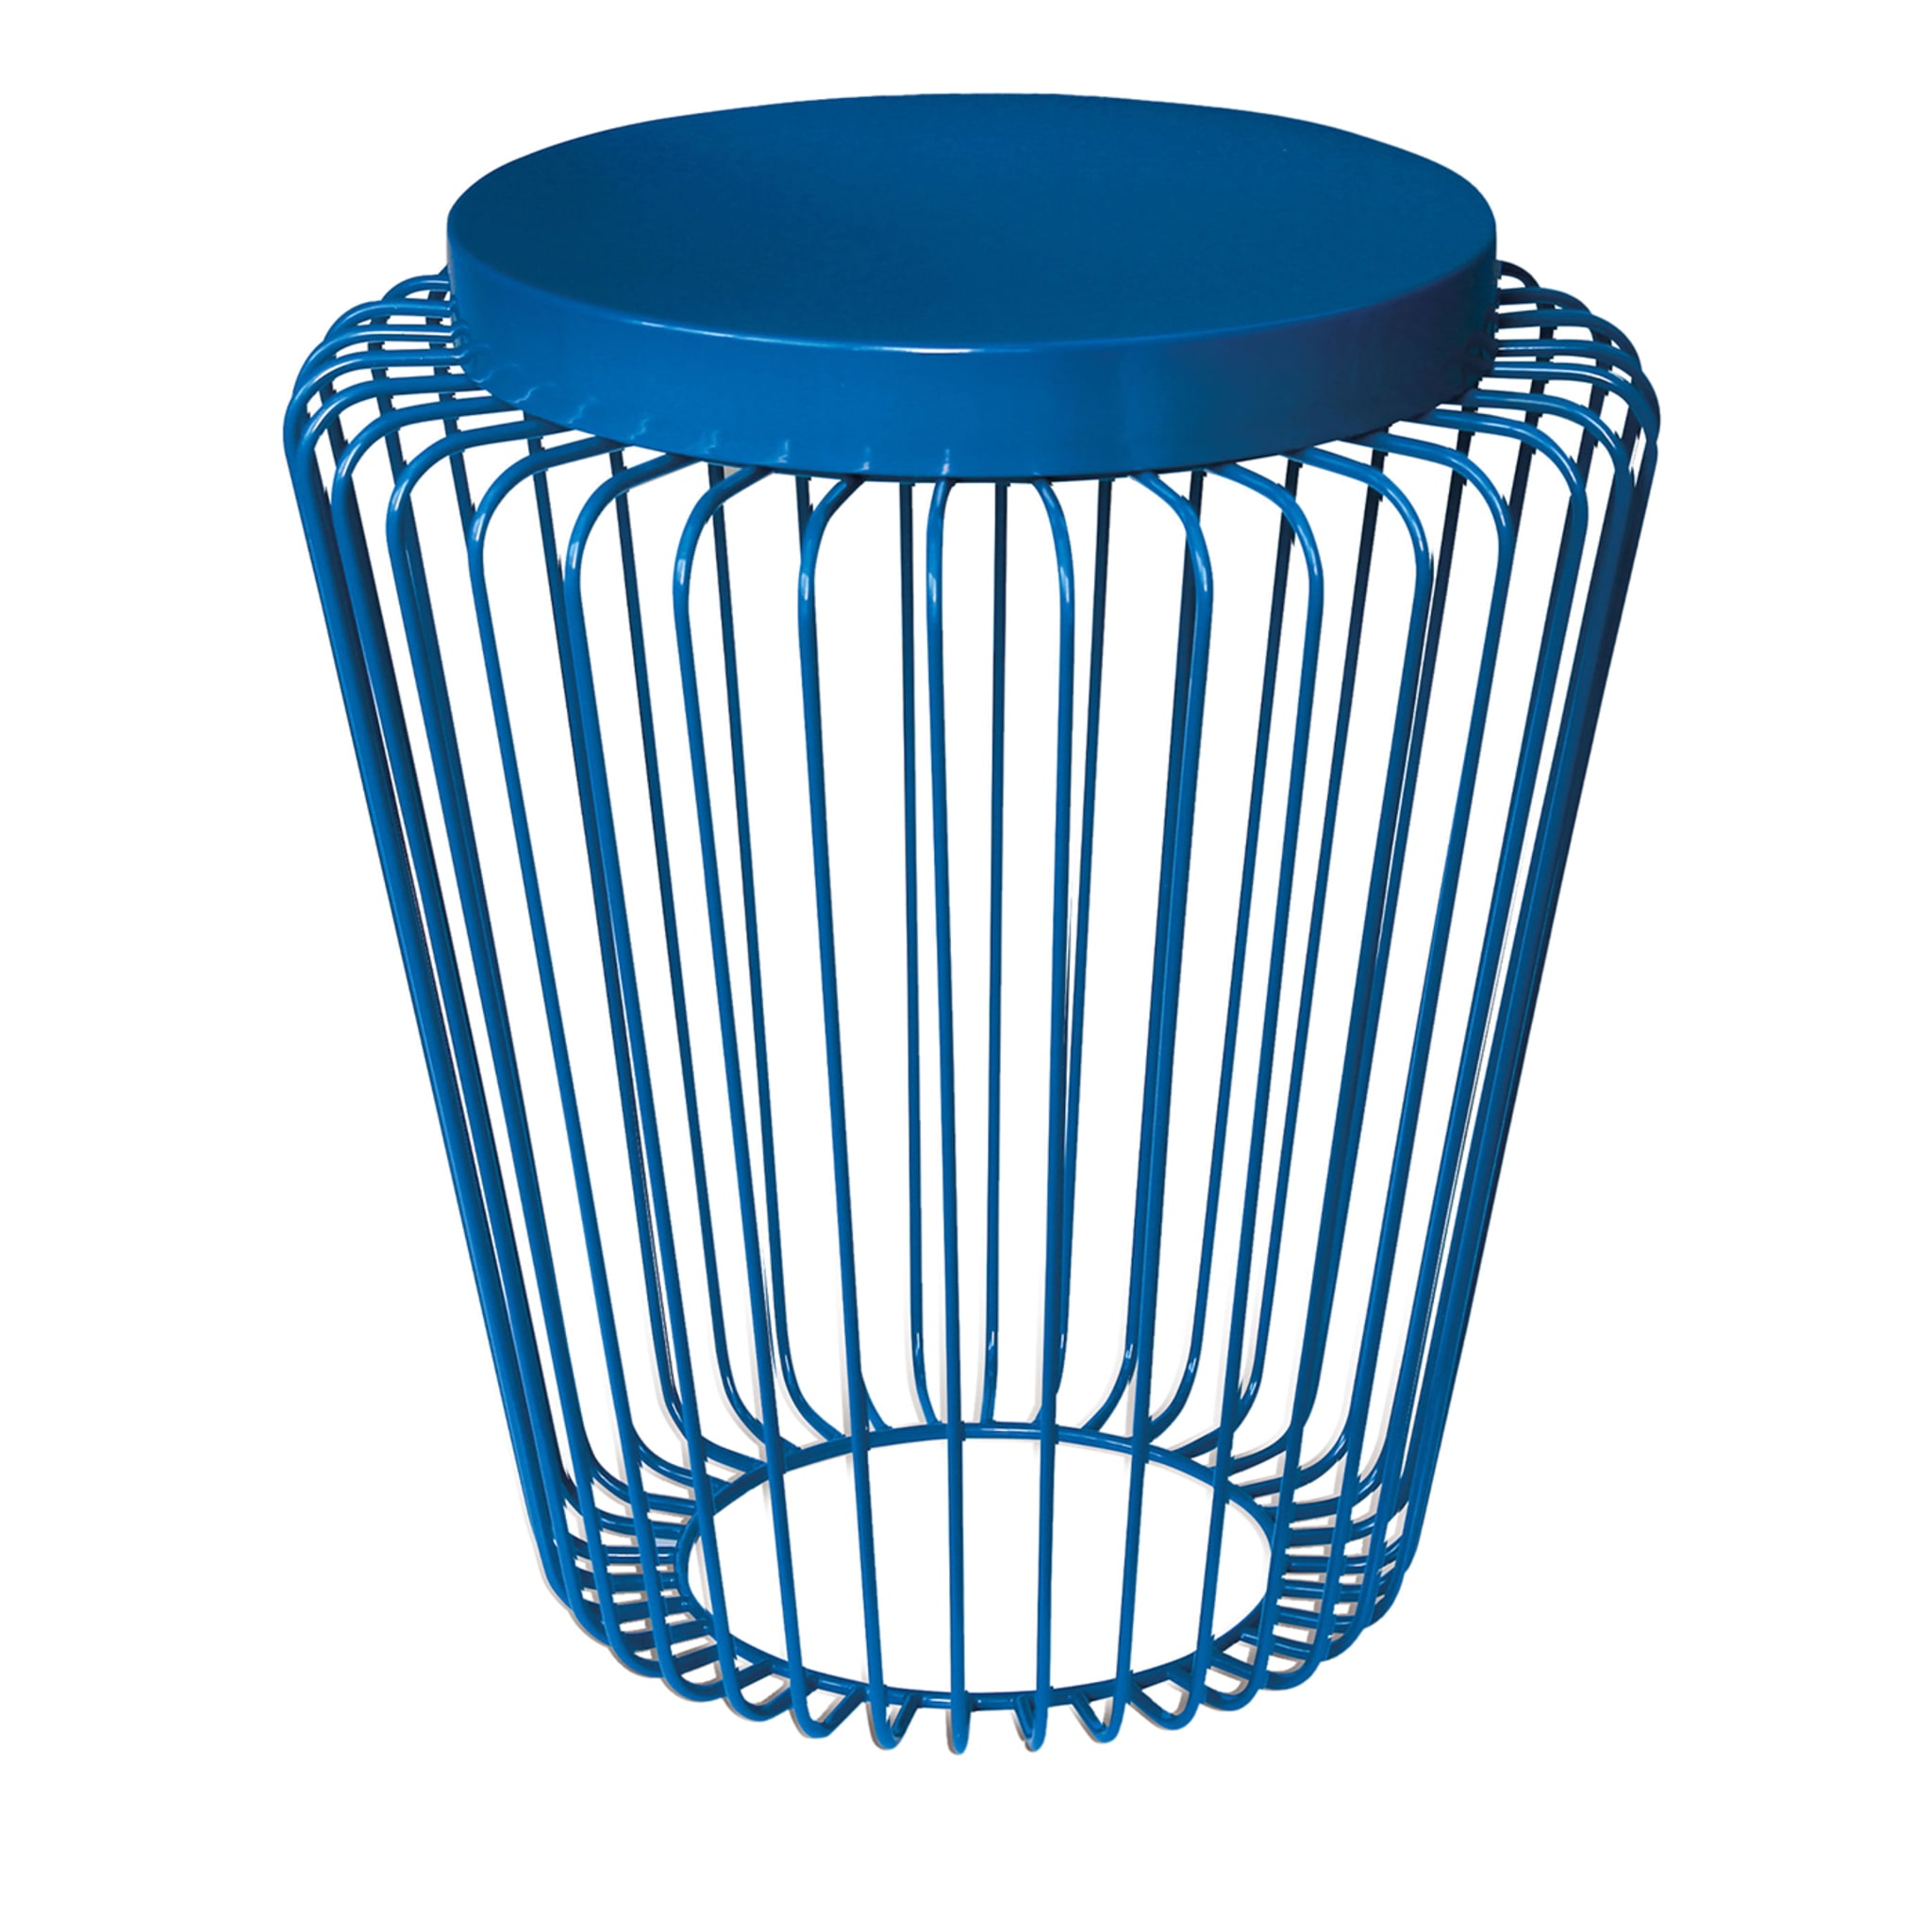 Cage Blue Lantern by Stefano Tabarin - Main view